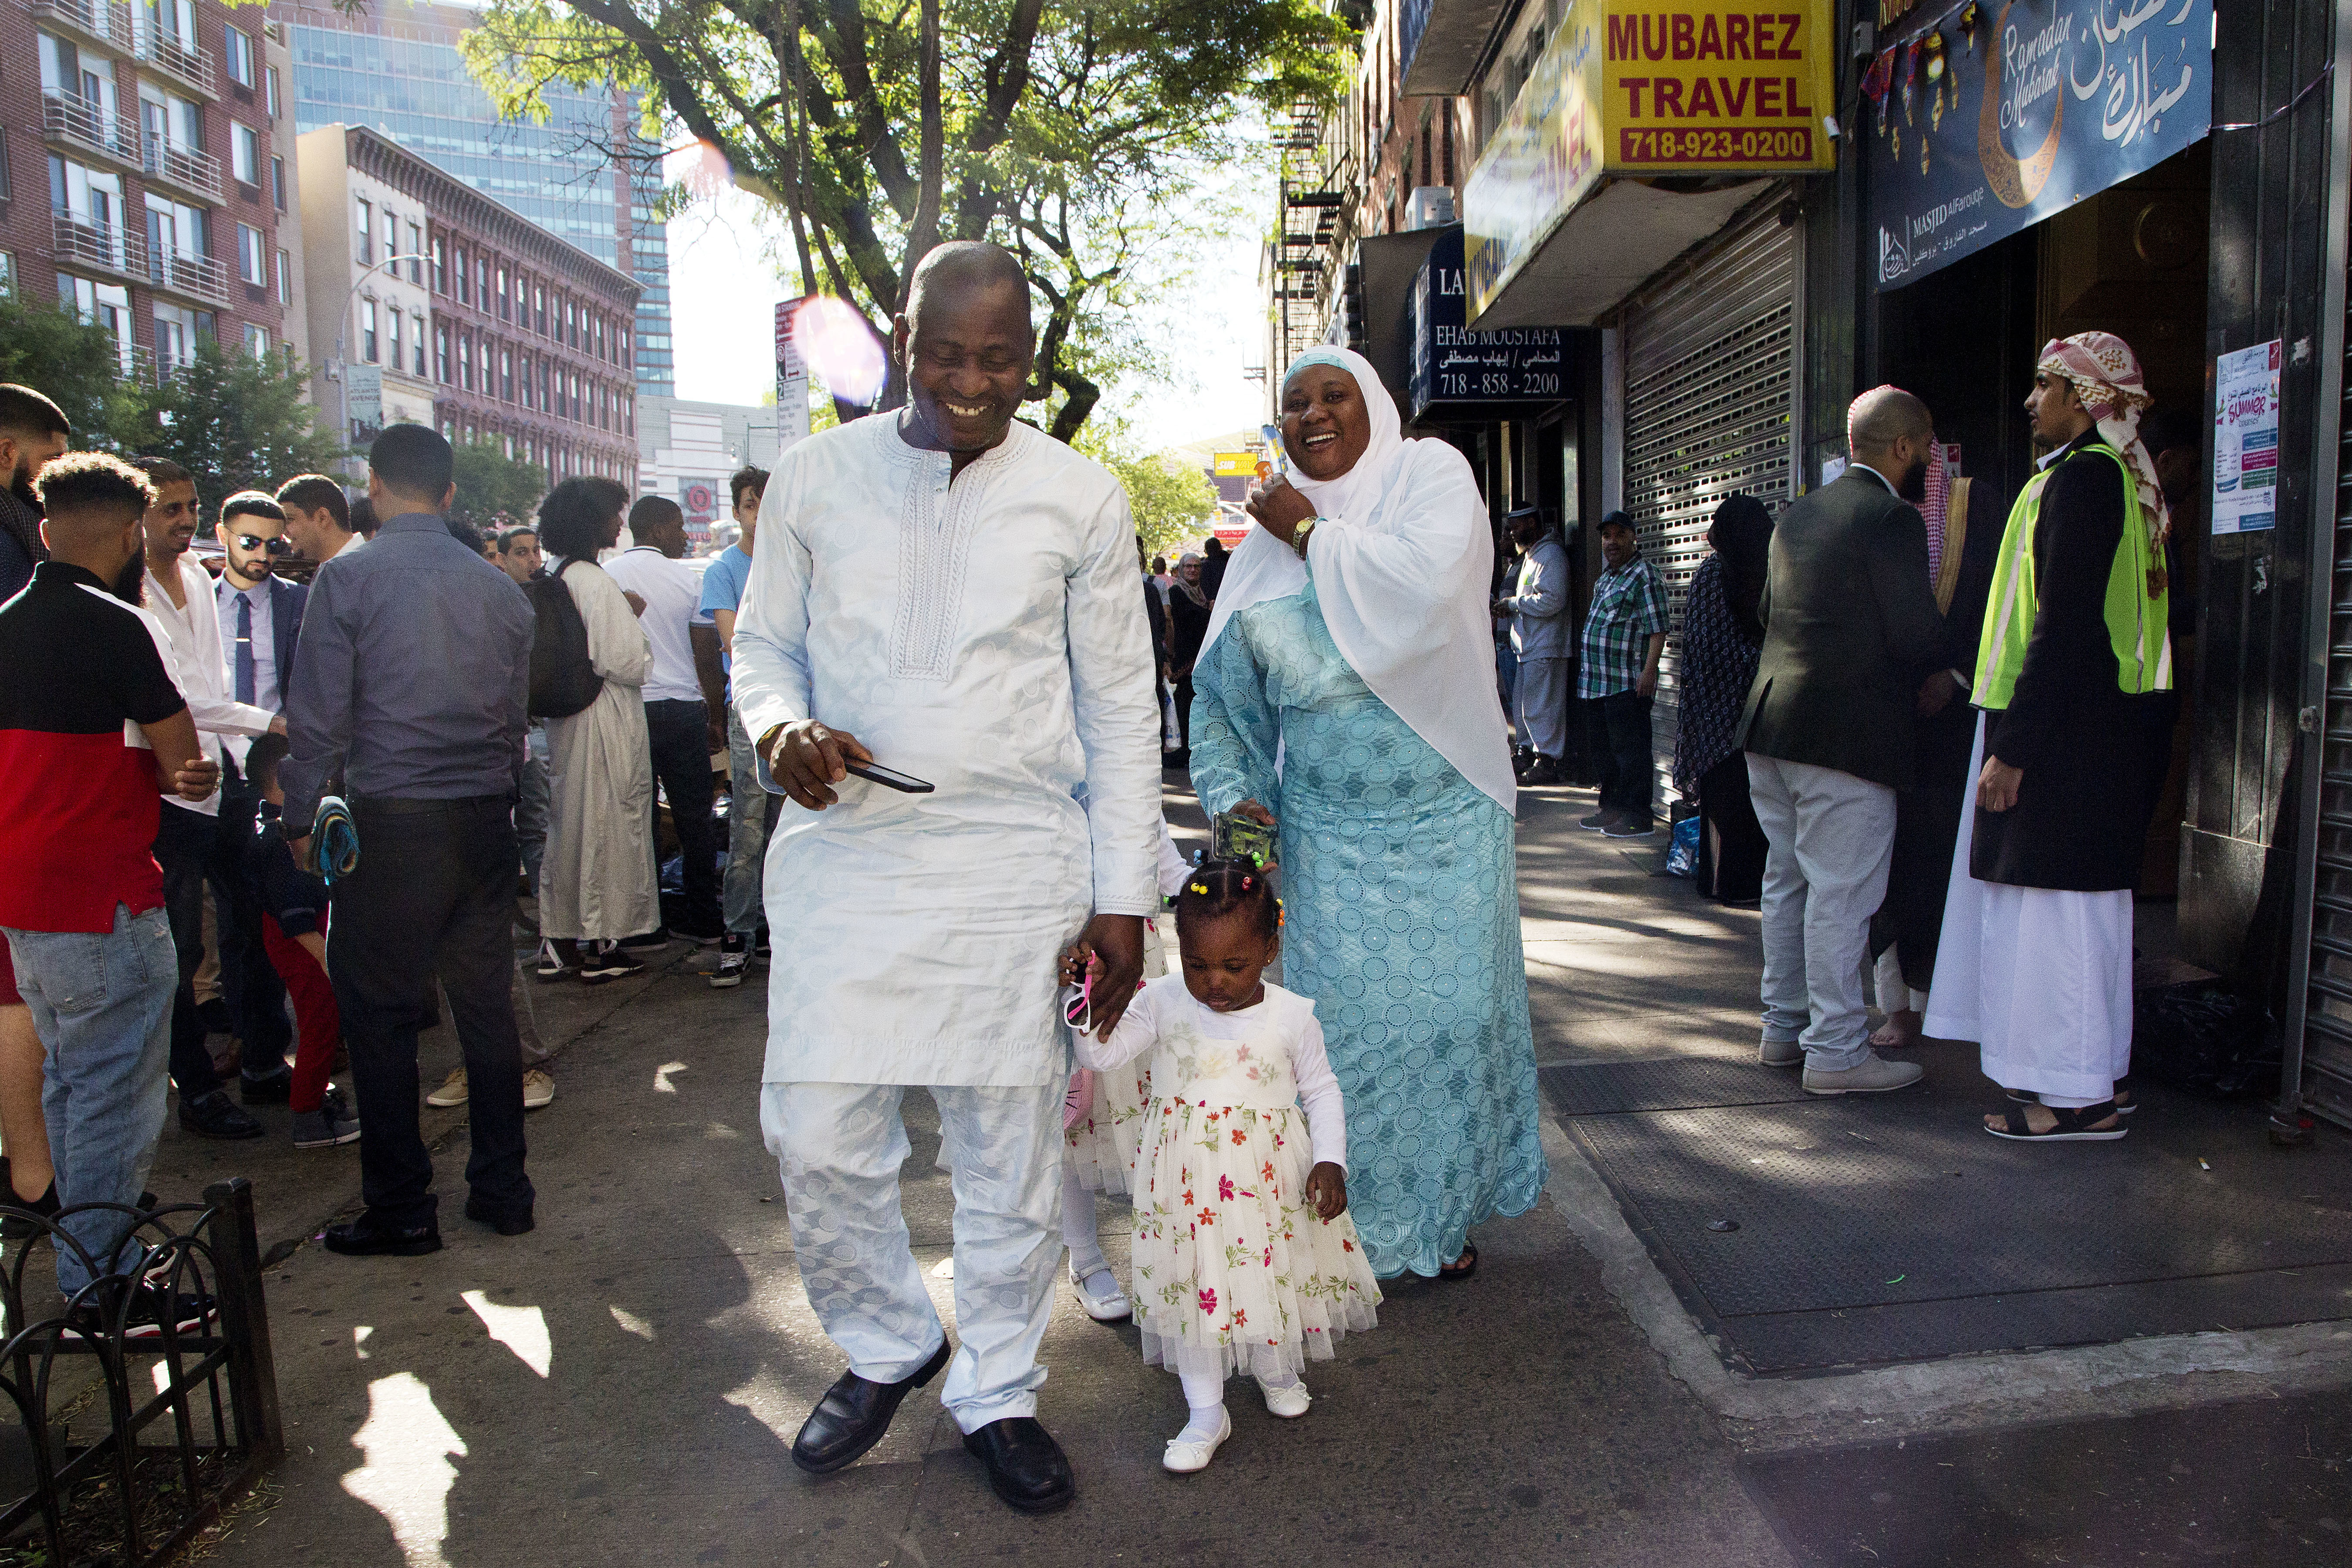 A family leaves Masjid Al-Farooq following a prayer service for the Muslim holiday of Eid al-Fitr, Friday, June 15, 2018, in the Brooklyn borough of New York. They join hundreds of millions of Muslims around the world in marking the holiday that caps the fasting month of Ramadan. (AP Photo/Mark Lennihan)